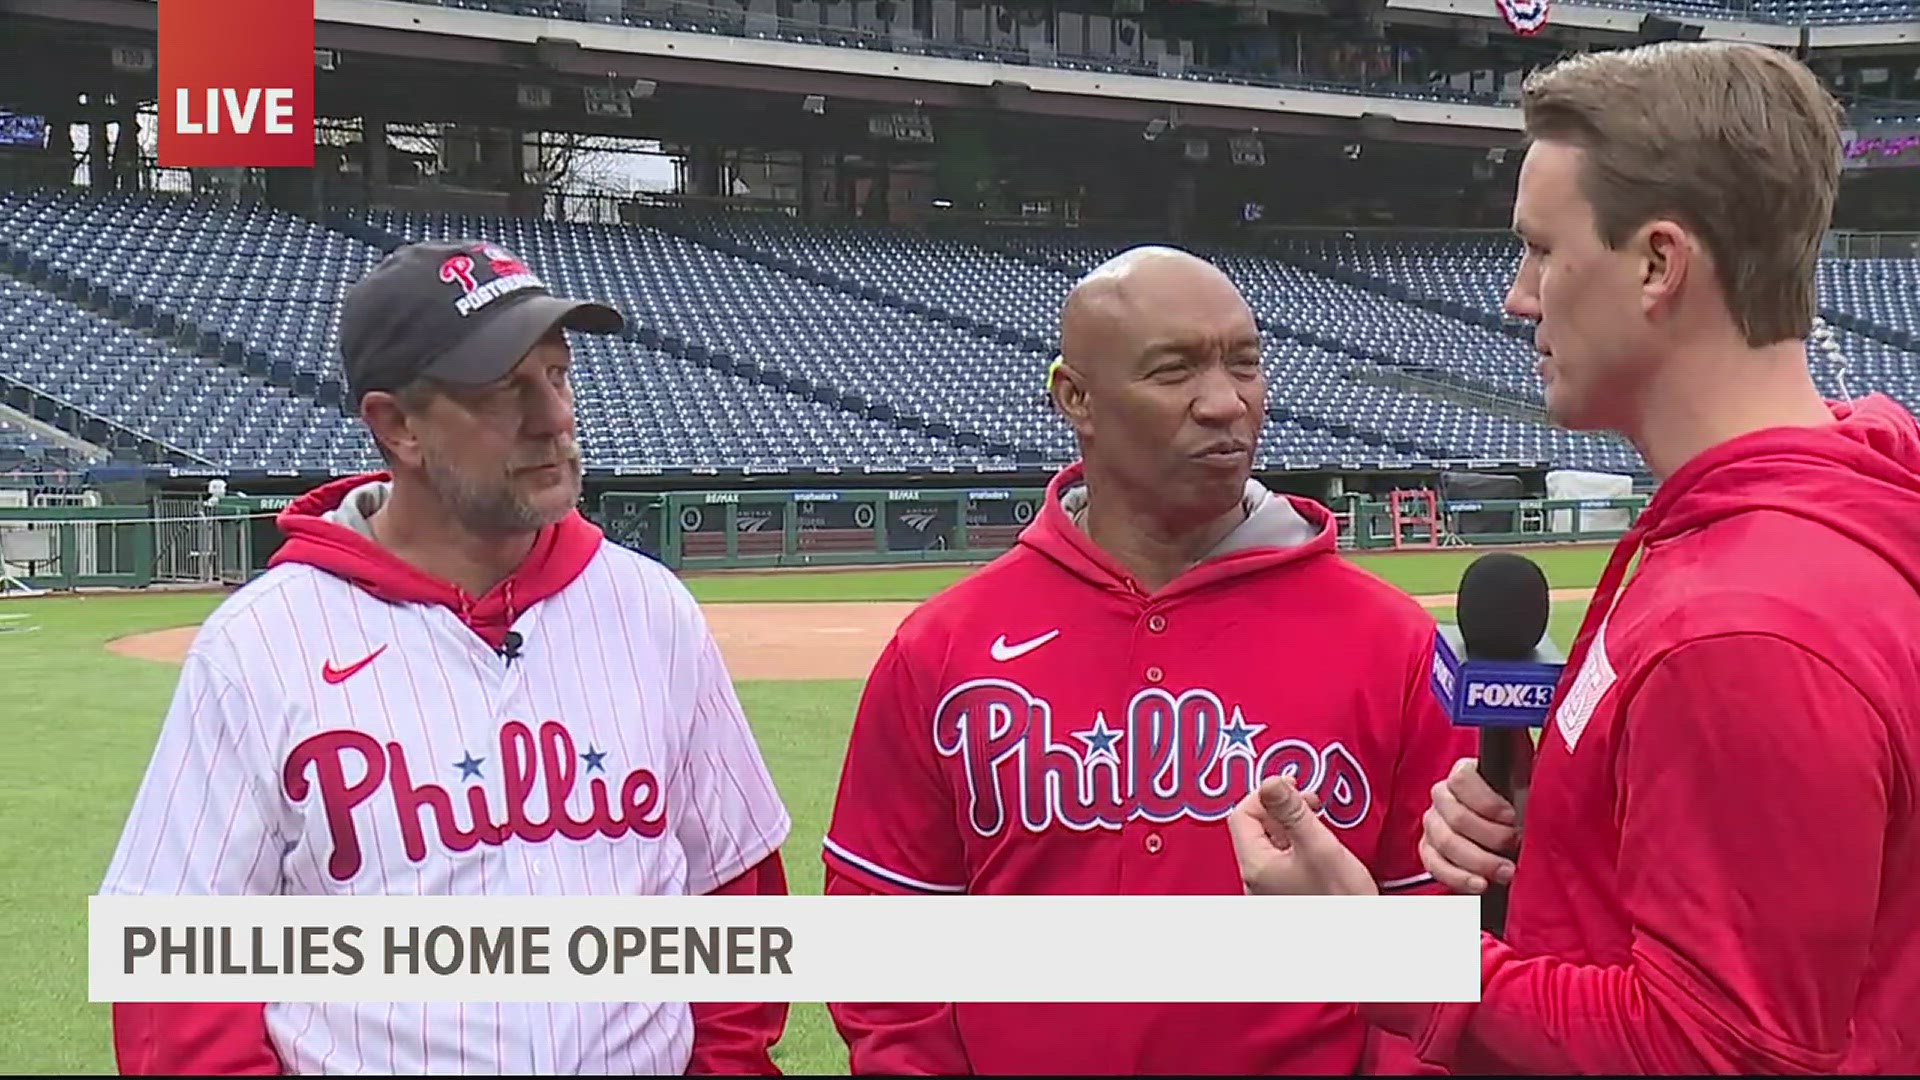 Former Phillies players Milt Thompson and Mickey Morandini offered insight on today's home opener and the start of the 2023 season.